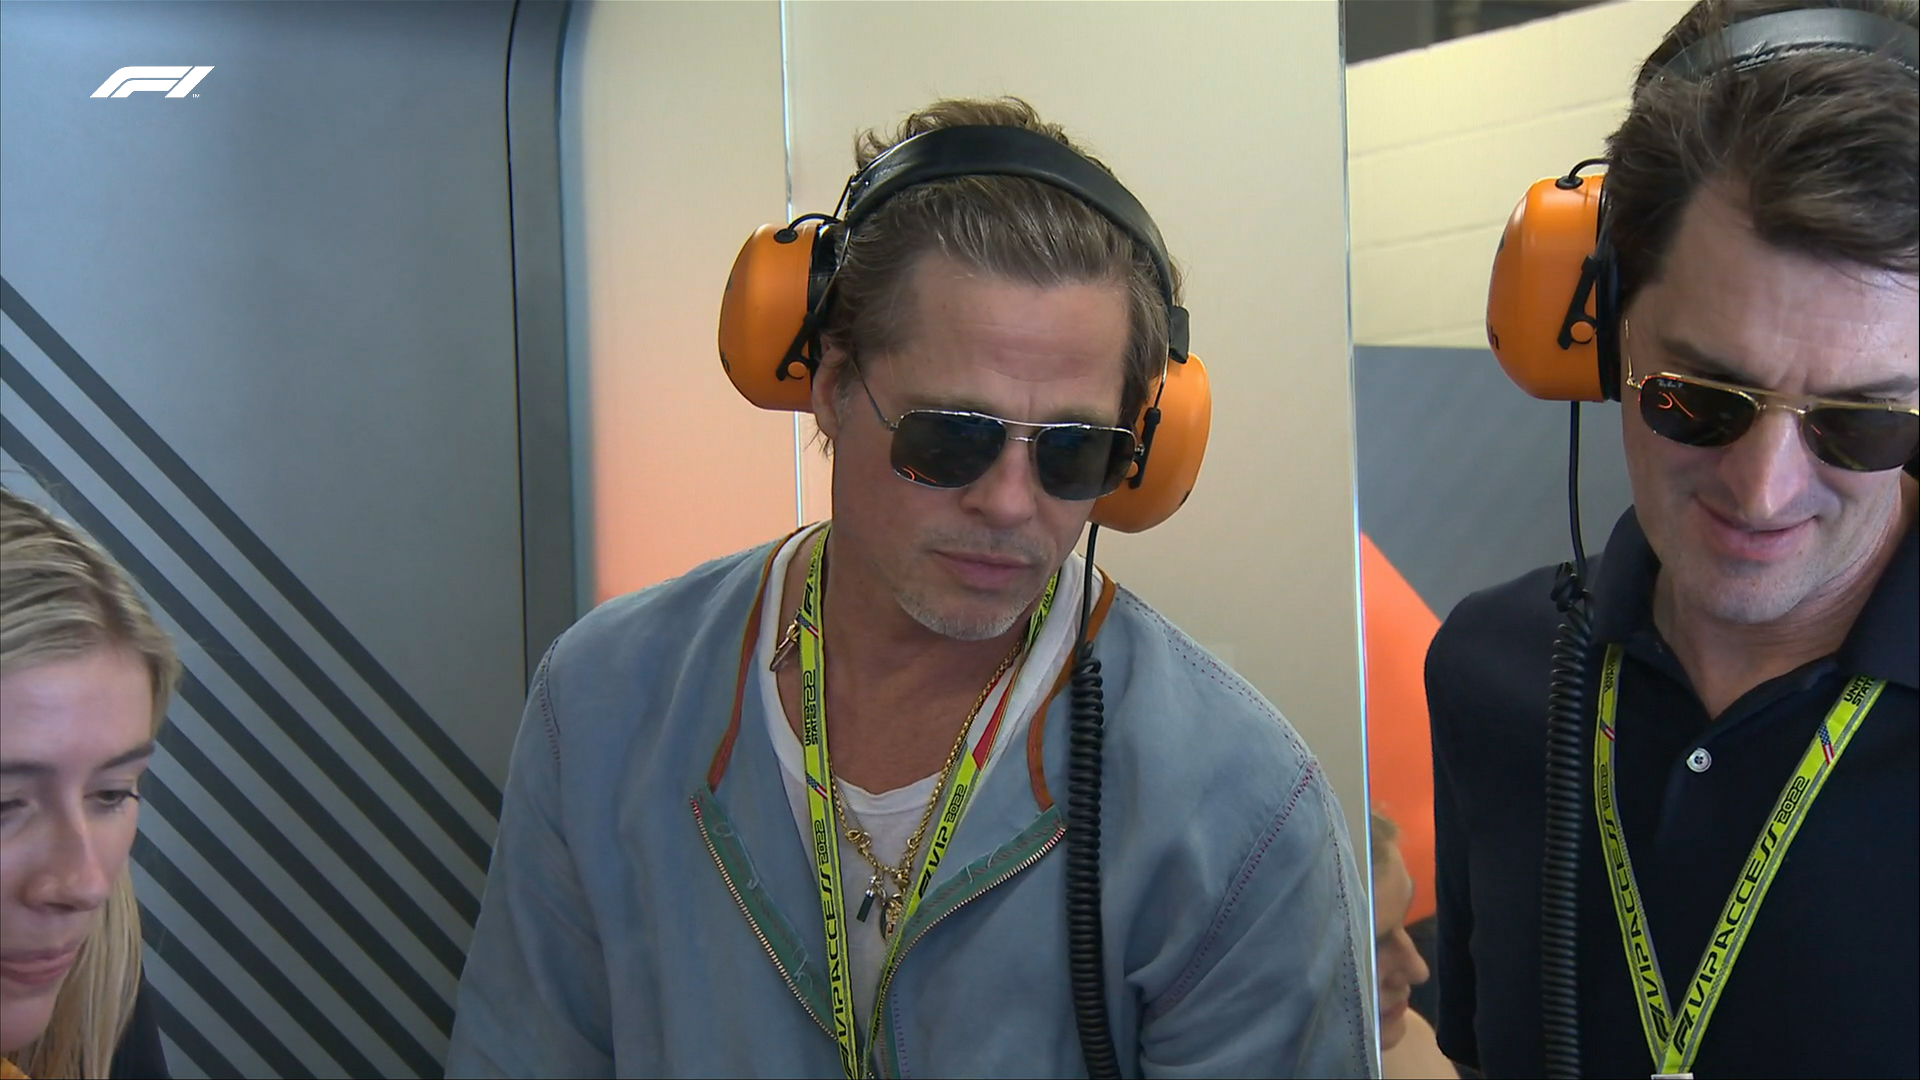 Brad Pitt is filming a new F1 Movie starting from the British Grand Prix in 2023.